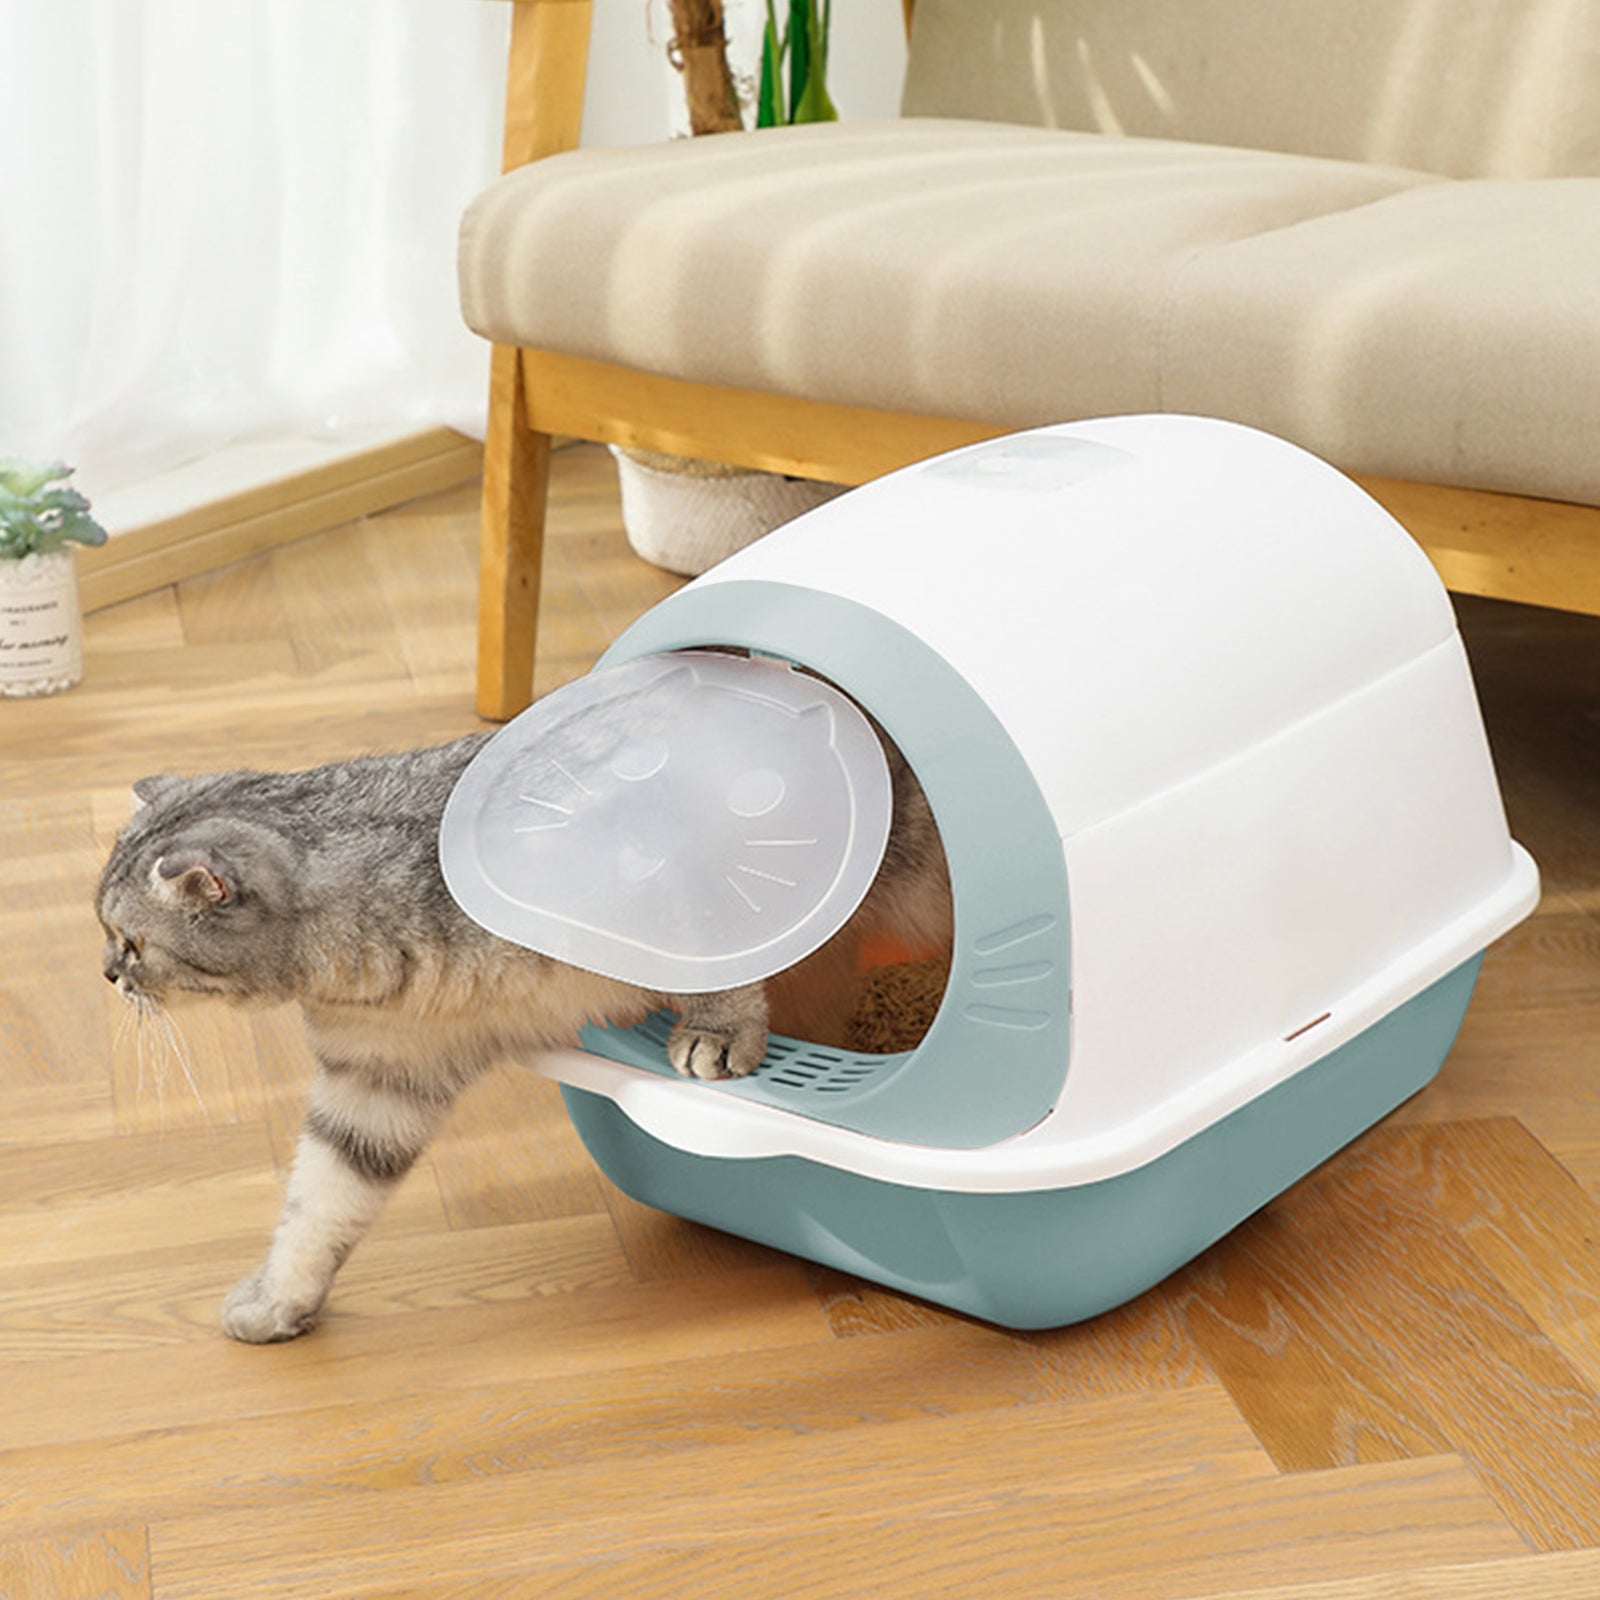  BNOSDM Collapsible Cat Litter Box for Kittens Small Shallow  Litter Boxes Open Standard Senior Cat Toilet Litter Tray Without Lid for  Travel : Pet Supplies